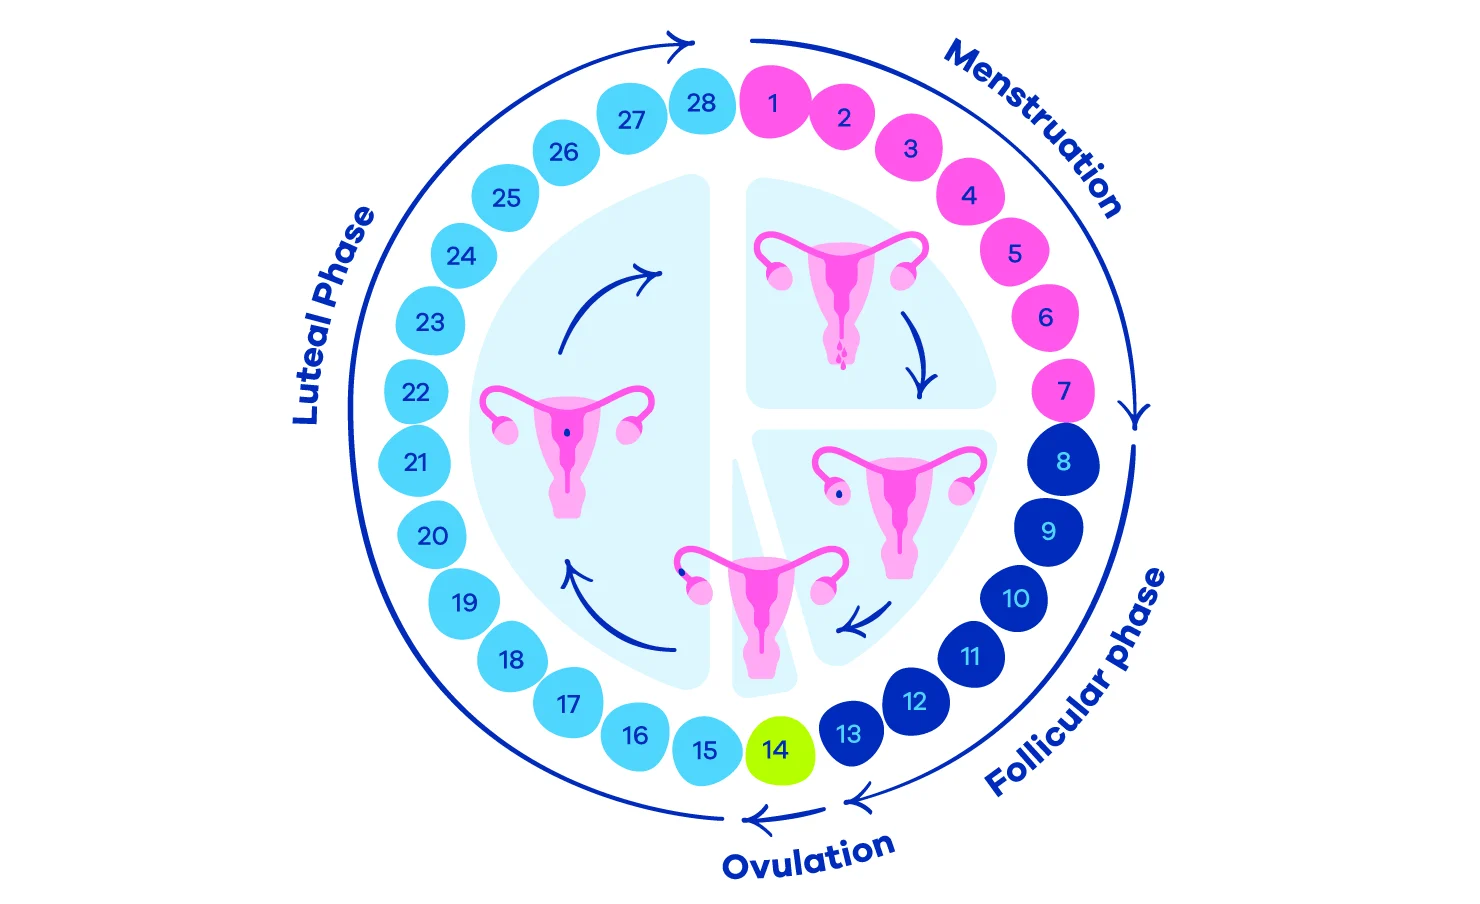 What You Need to Know About Your Ovulation Cycle [Infographic